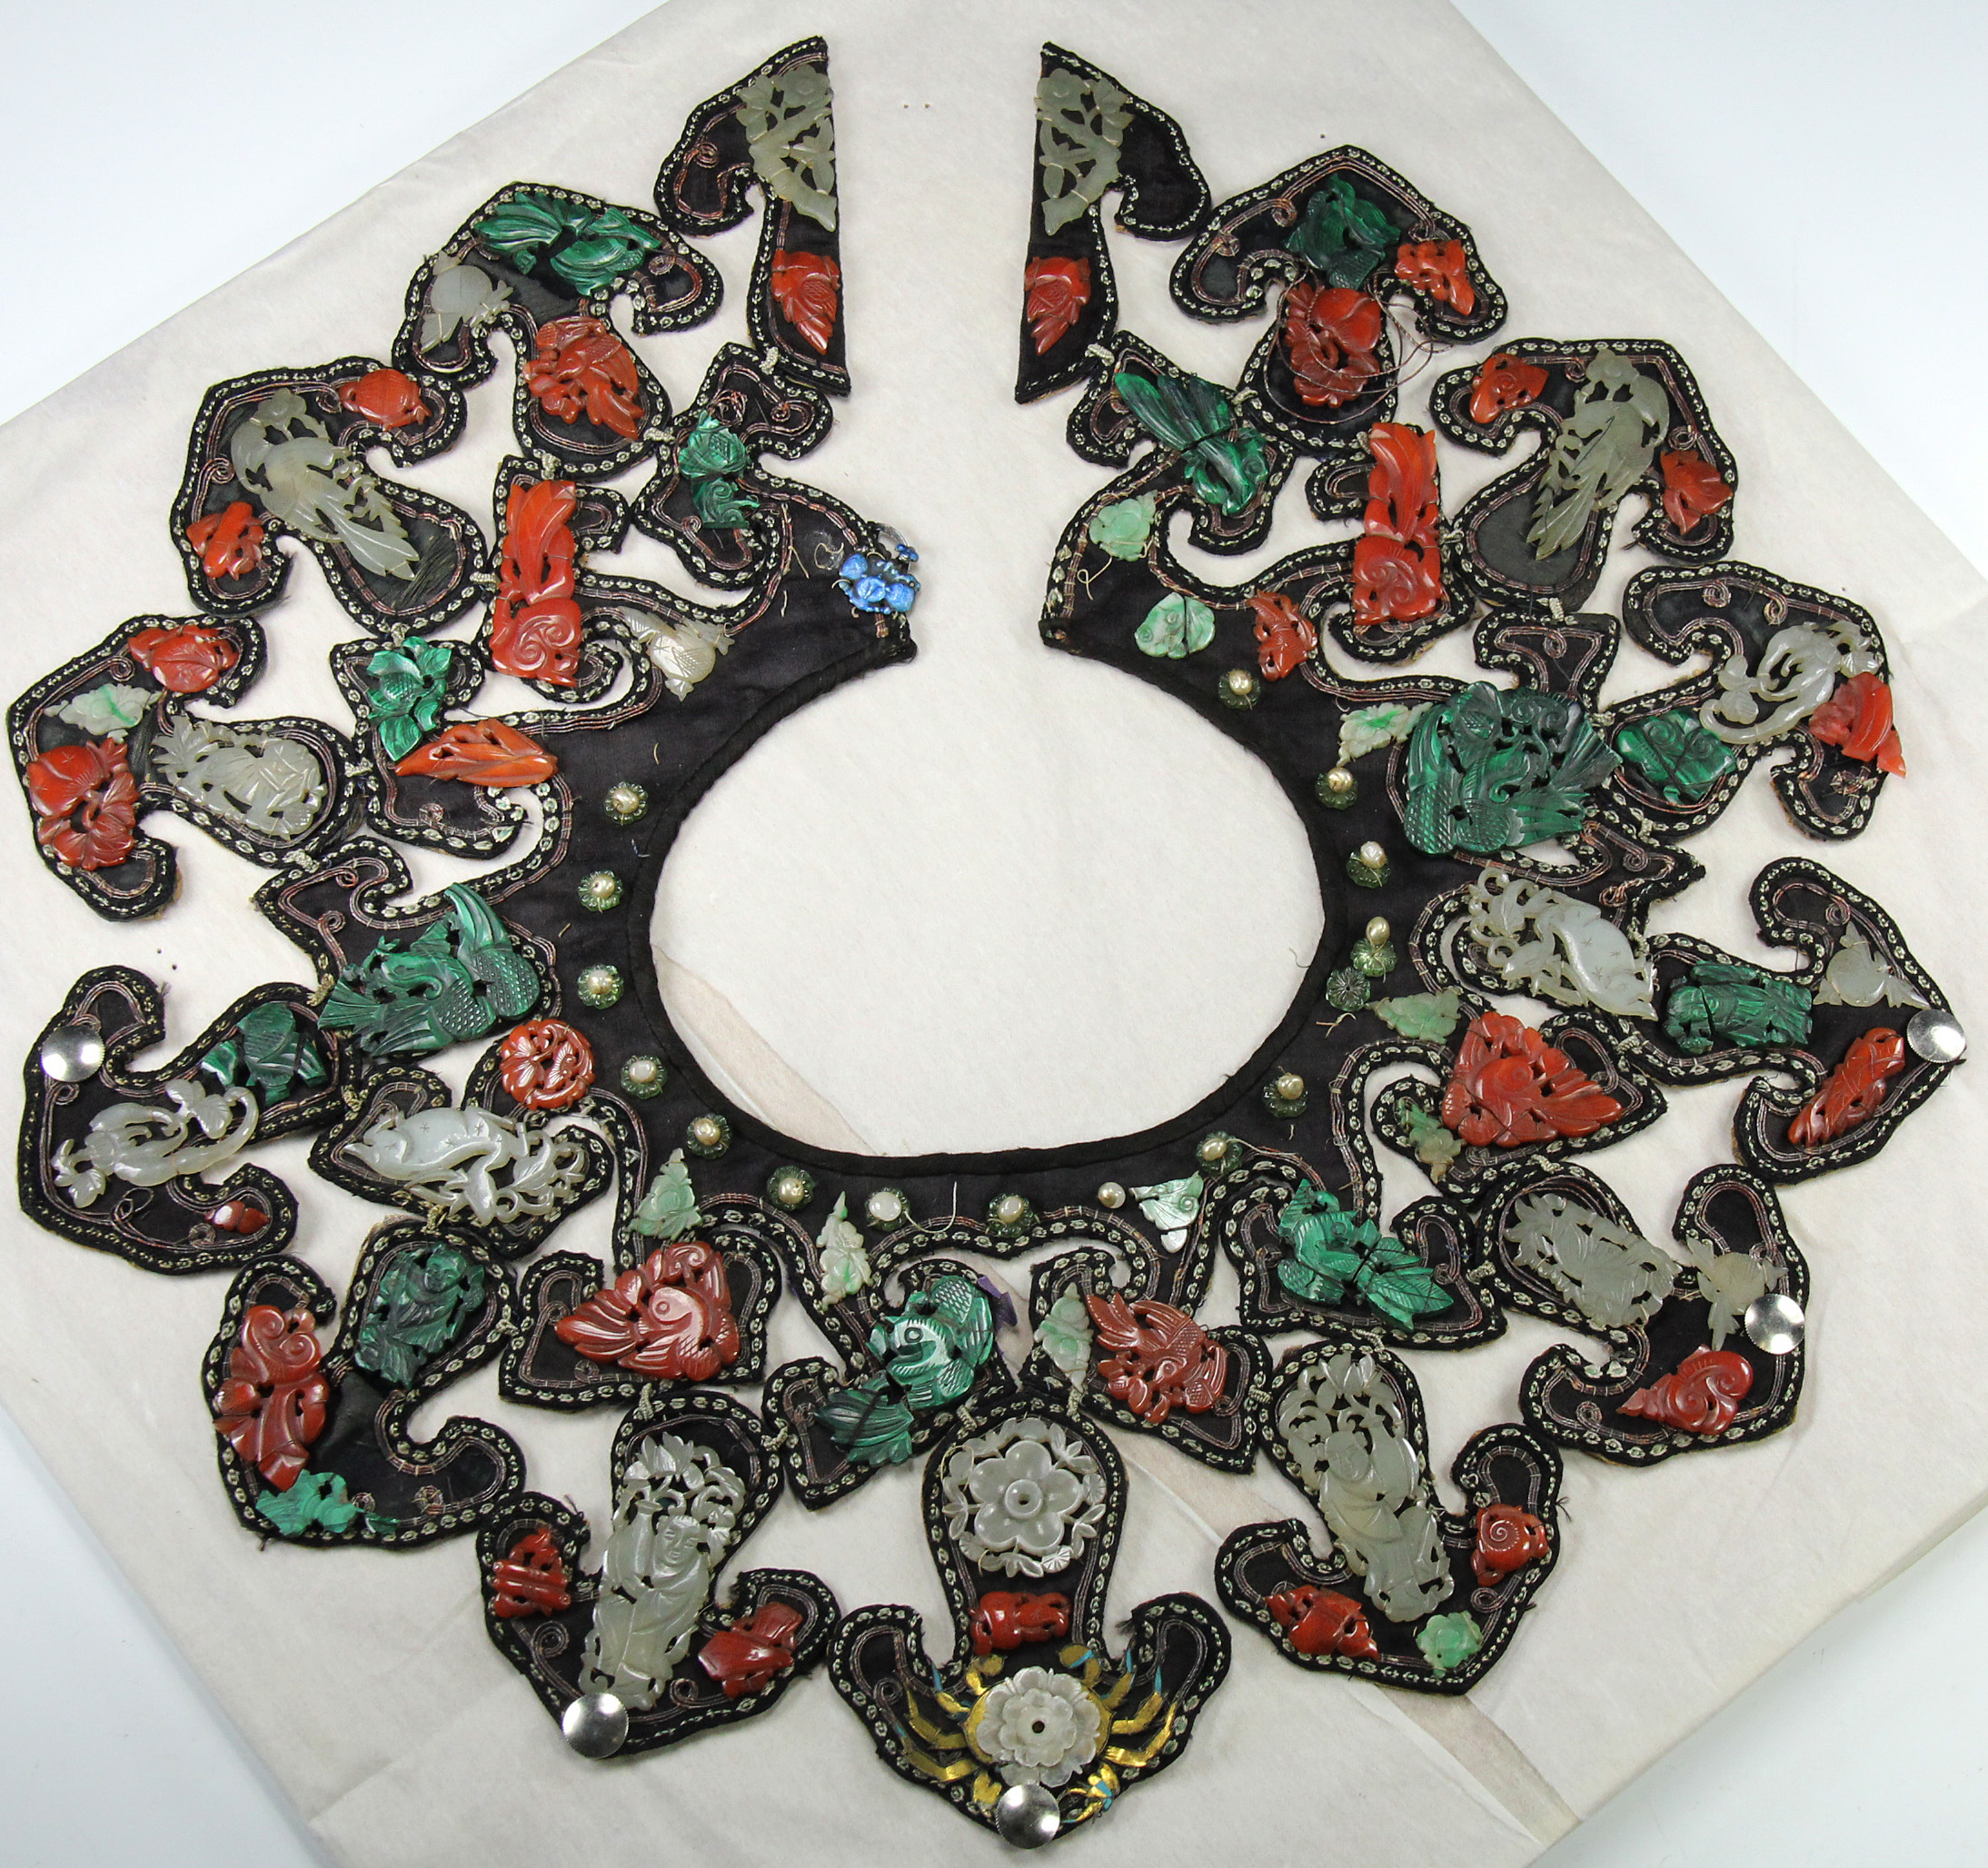 Qing Dynasty Chinese collar with embellishments including Jade